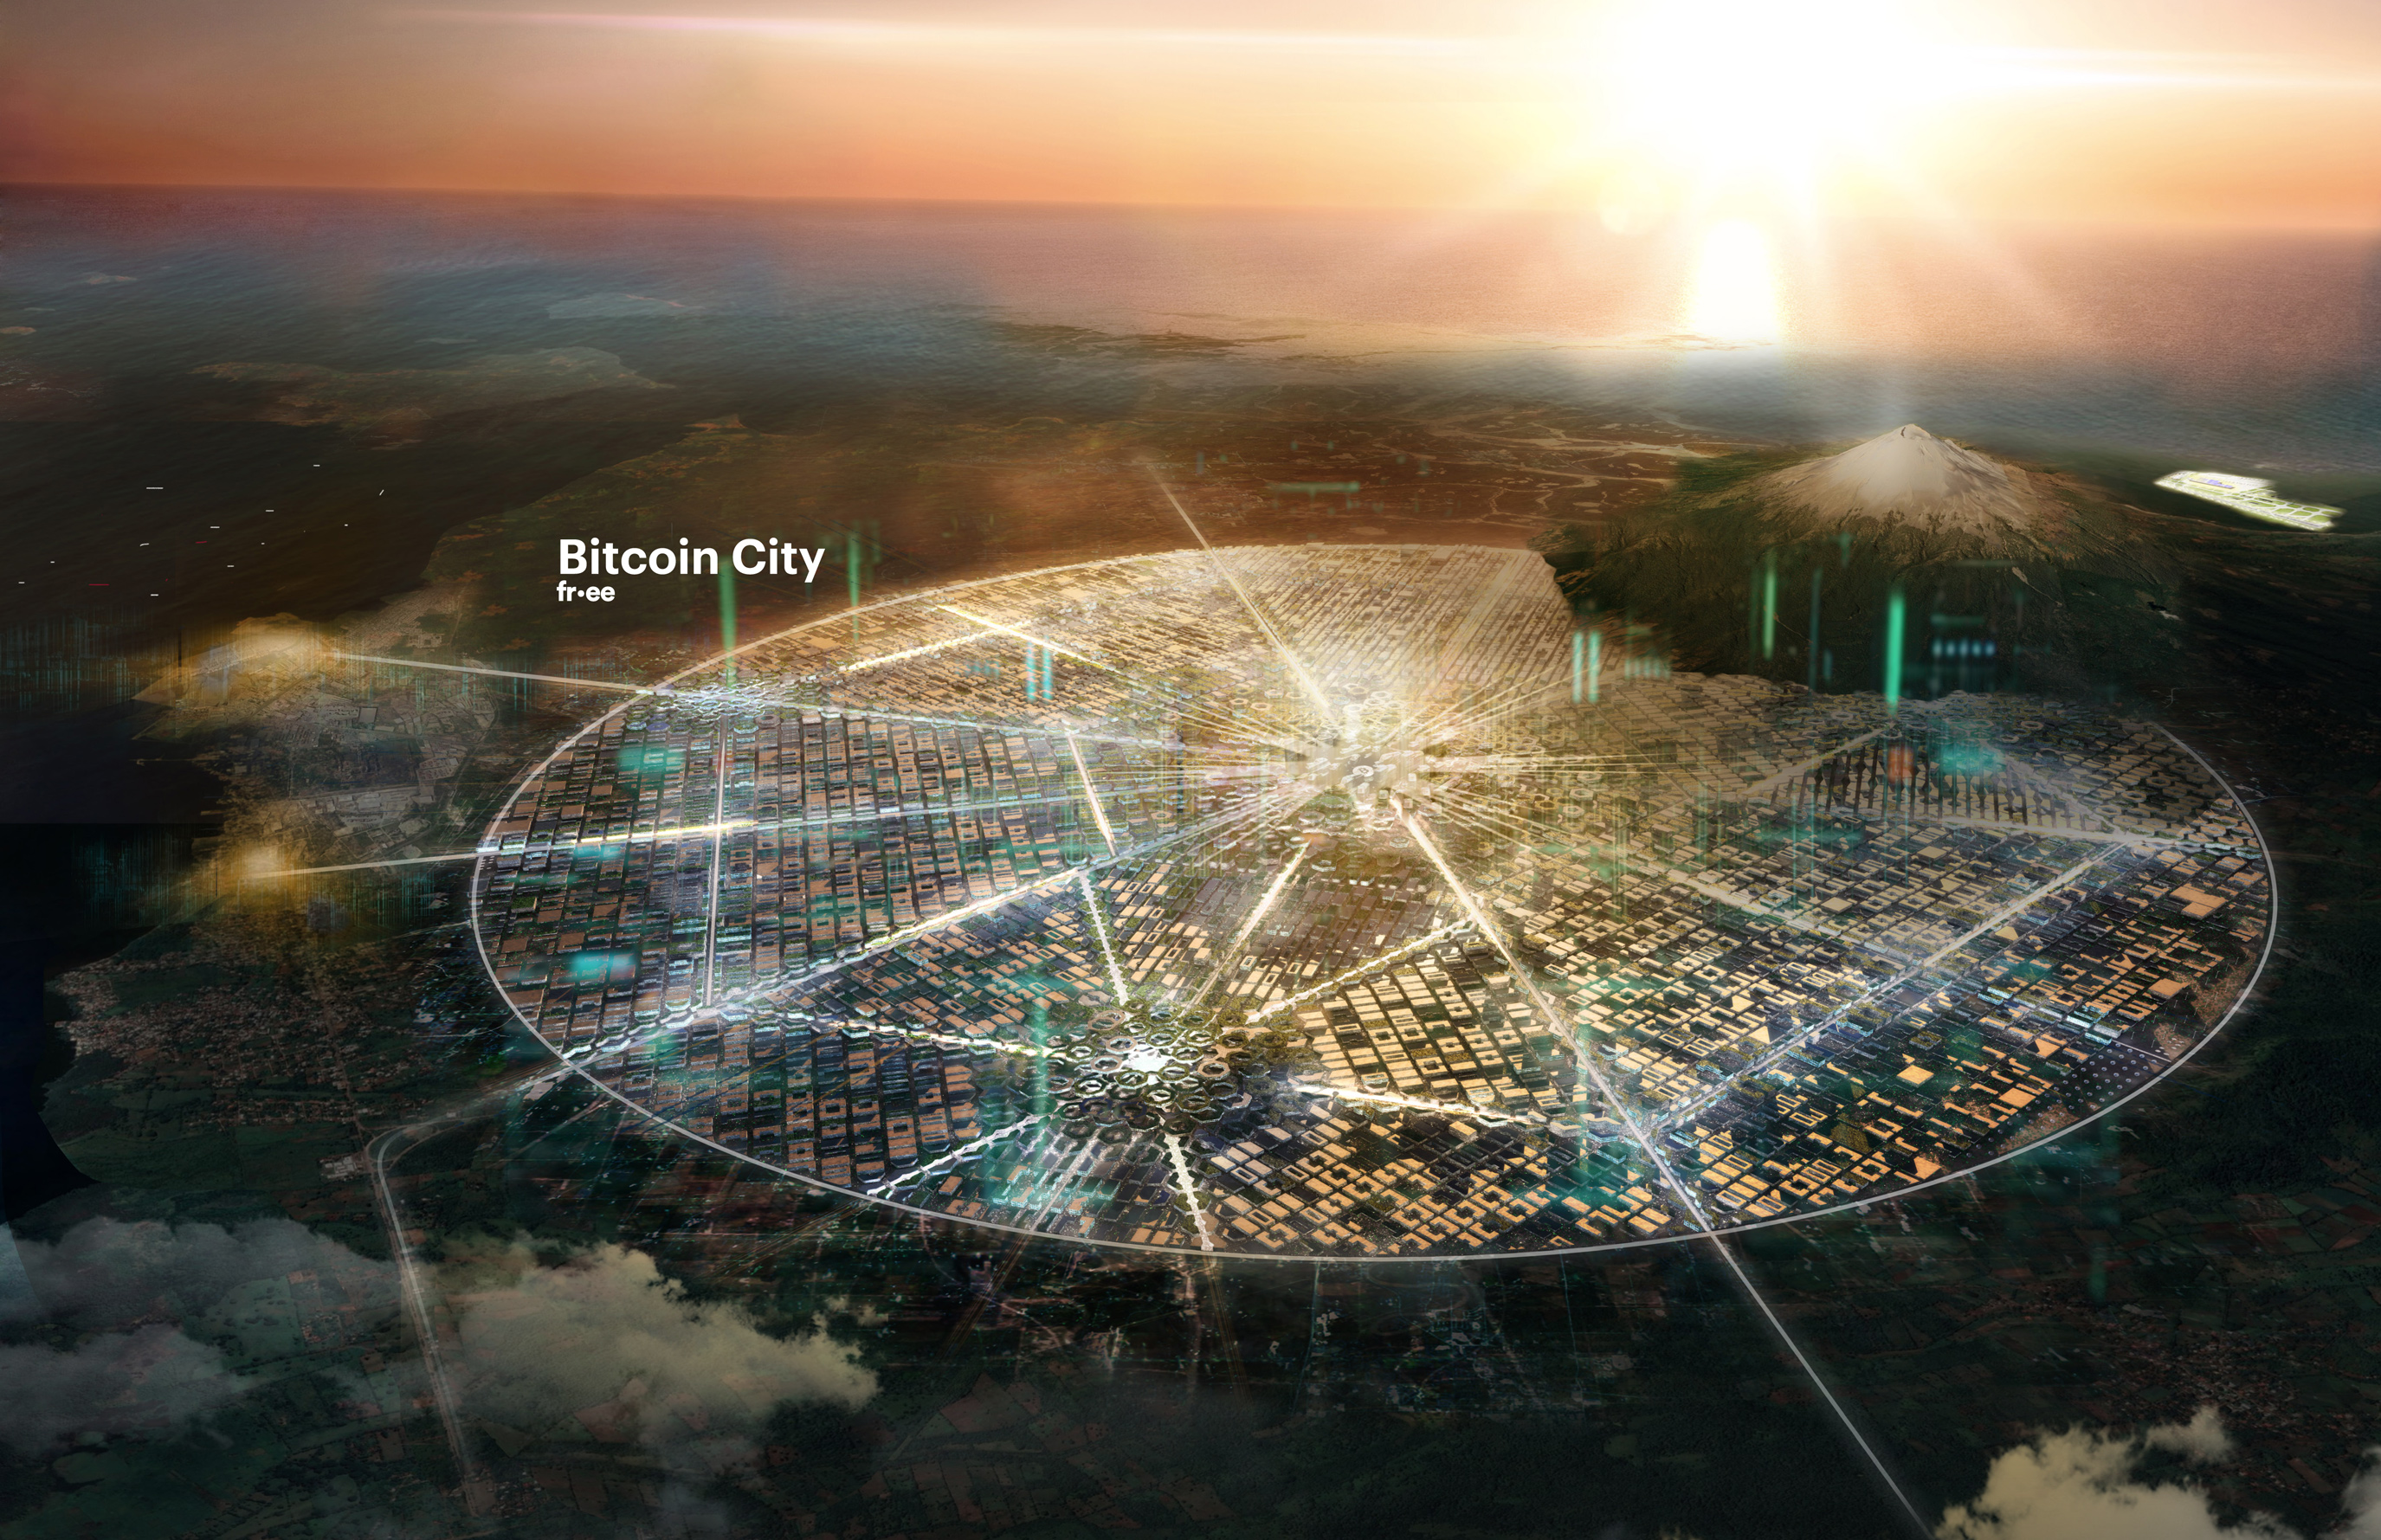 Bitcoin City Layout Unveiled: Will Crypto Metropolis Help El Salvador’s Ailing Economy?